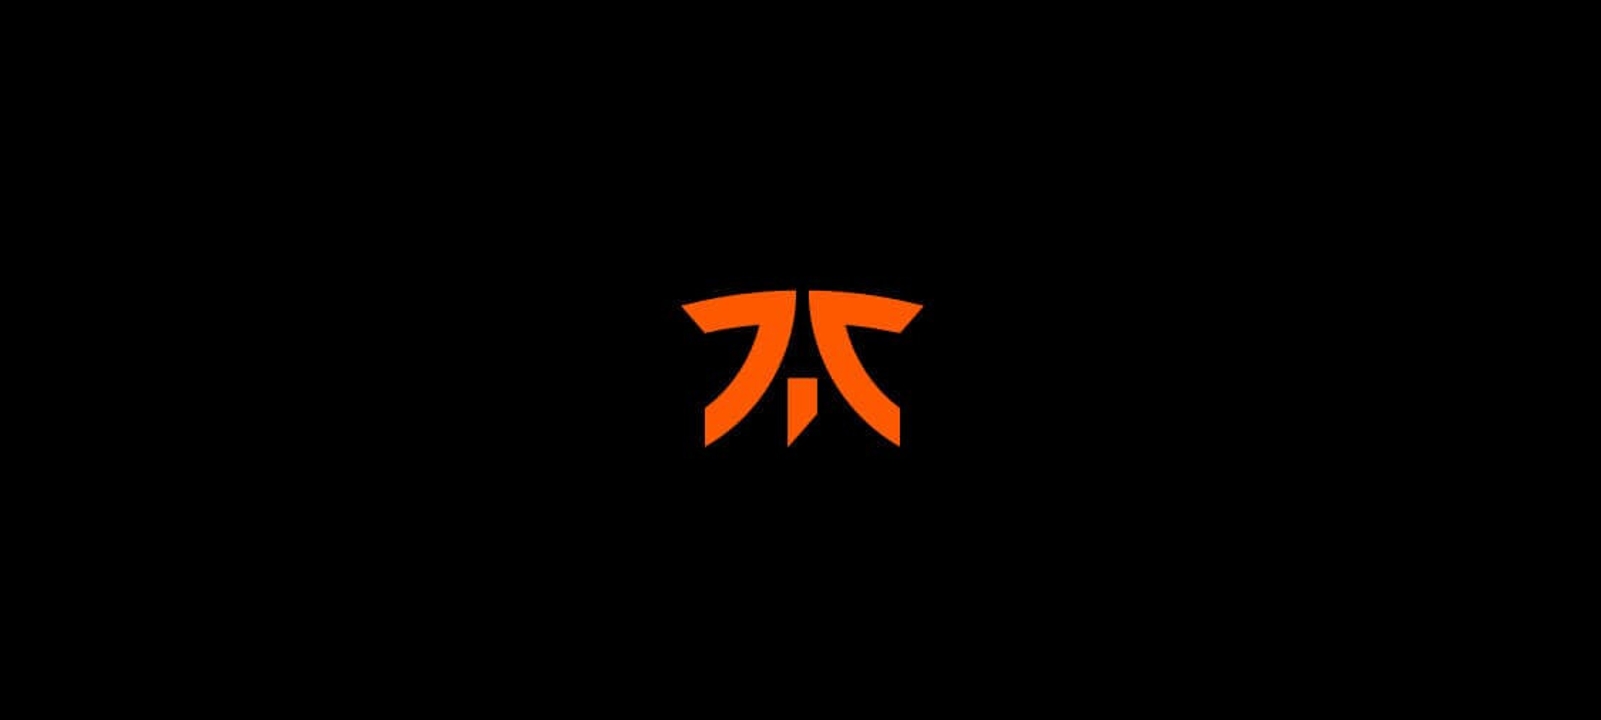 Fnatic Announces the Appointment of New CFO, Patrick Foster